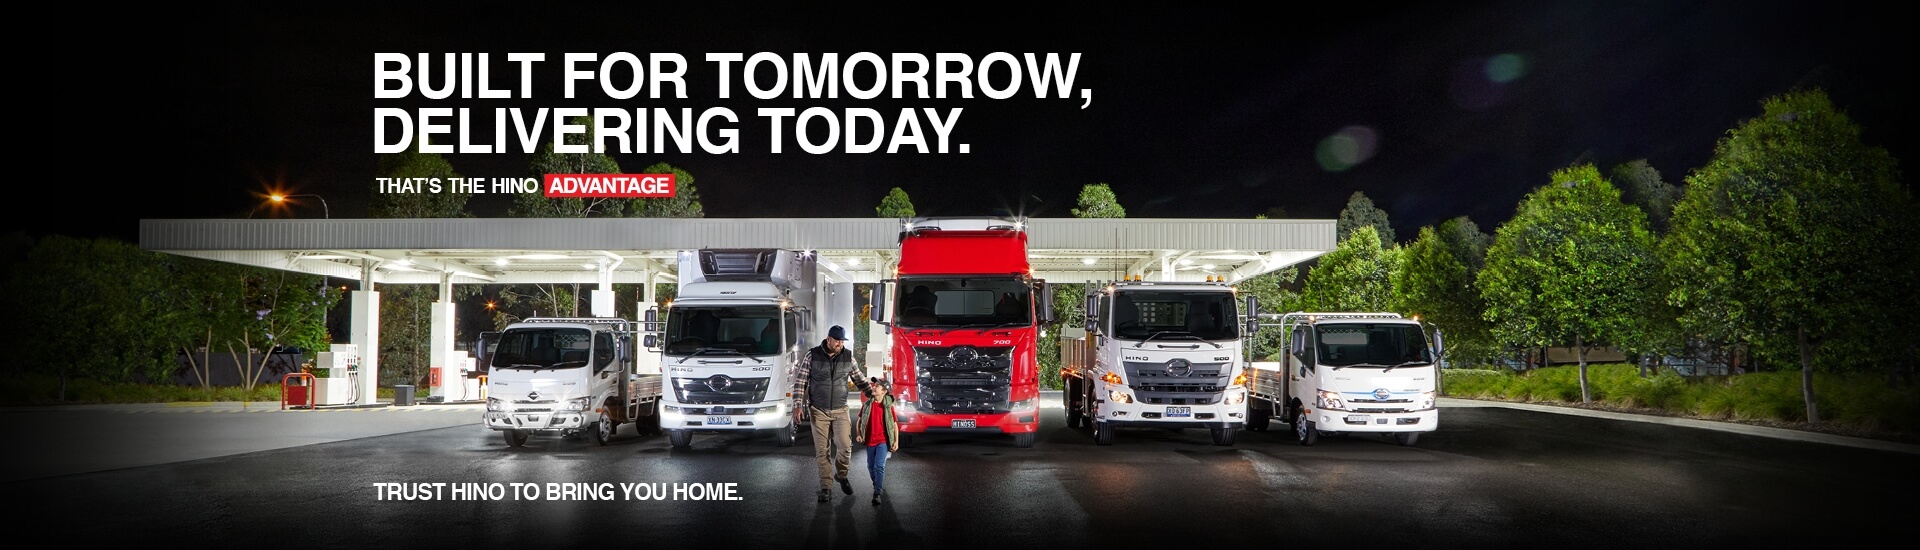 Built for tomorrow, delivering today. About us.